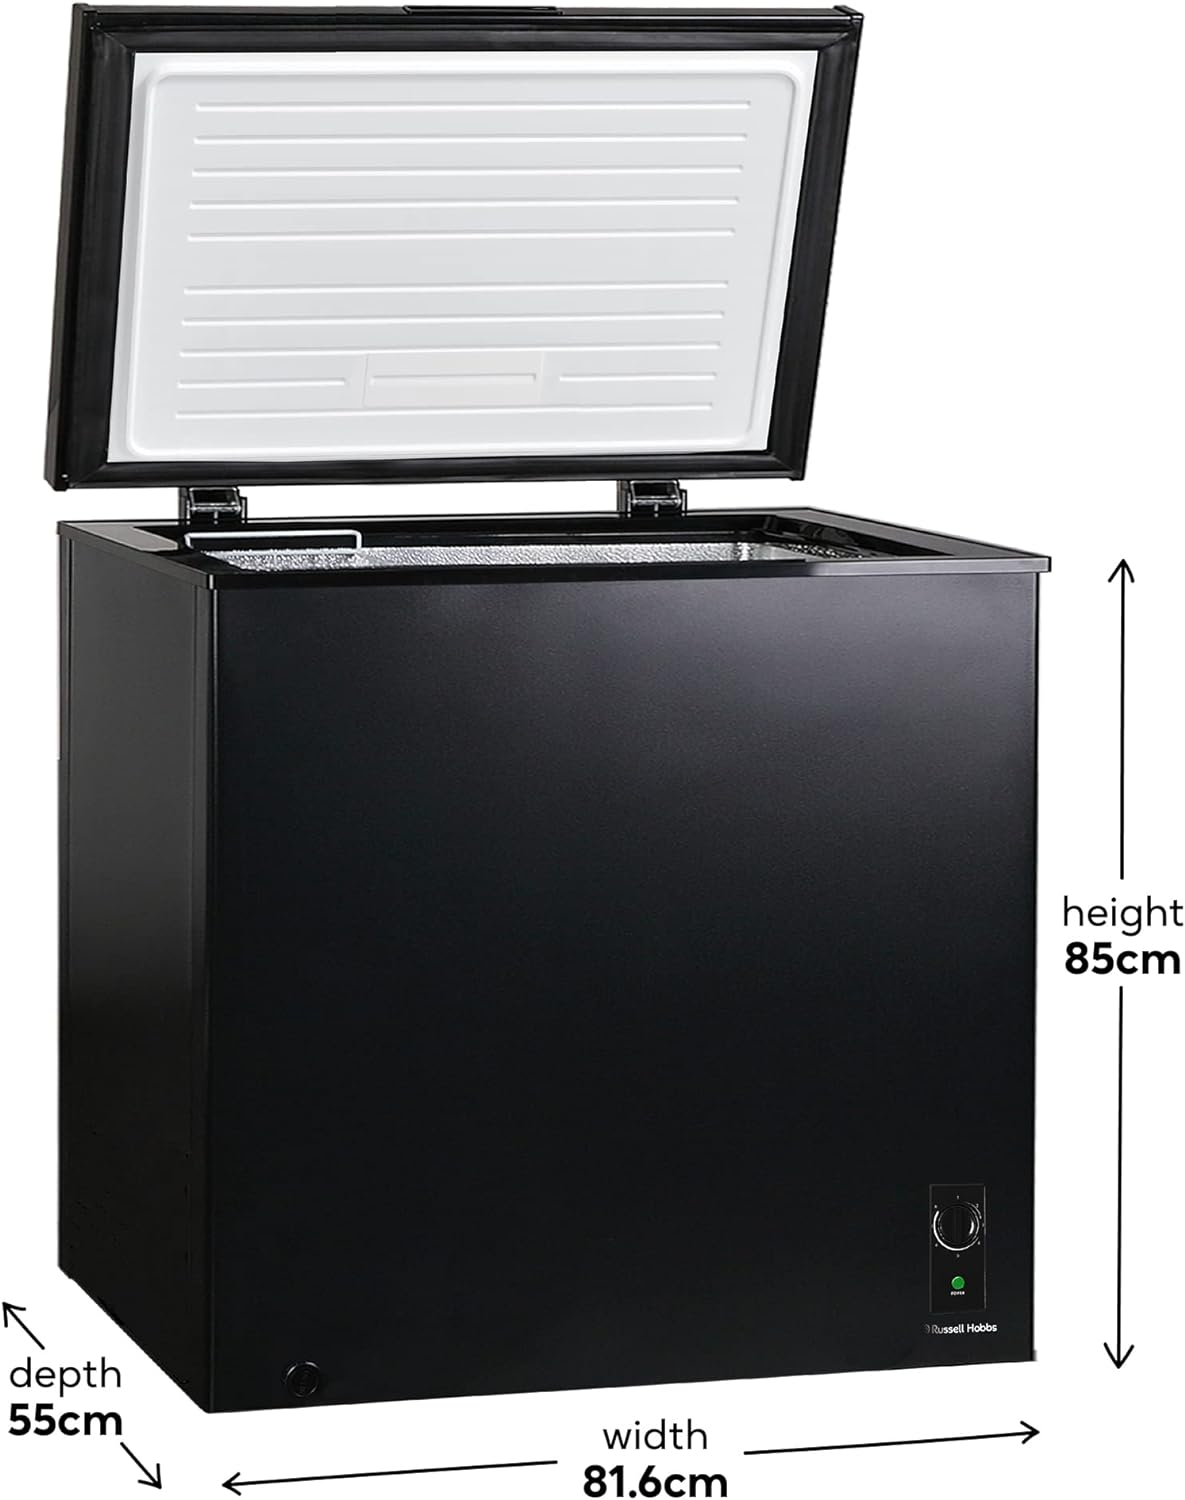 Russell Hobbs RH198CF3003B 198L Freestanding Black Chest Freezer with 5 Year Warranty, Adjustable Thermostat, 4 Star Freezer Rating & Suitable for Outbuildings & Garages - Amazing Gadgets Outlet